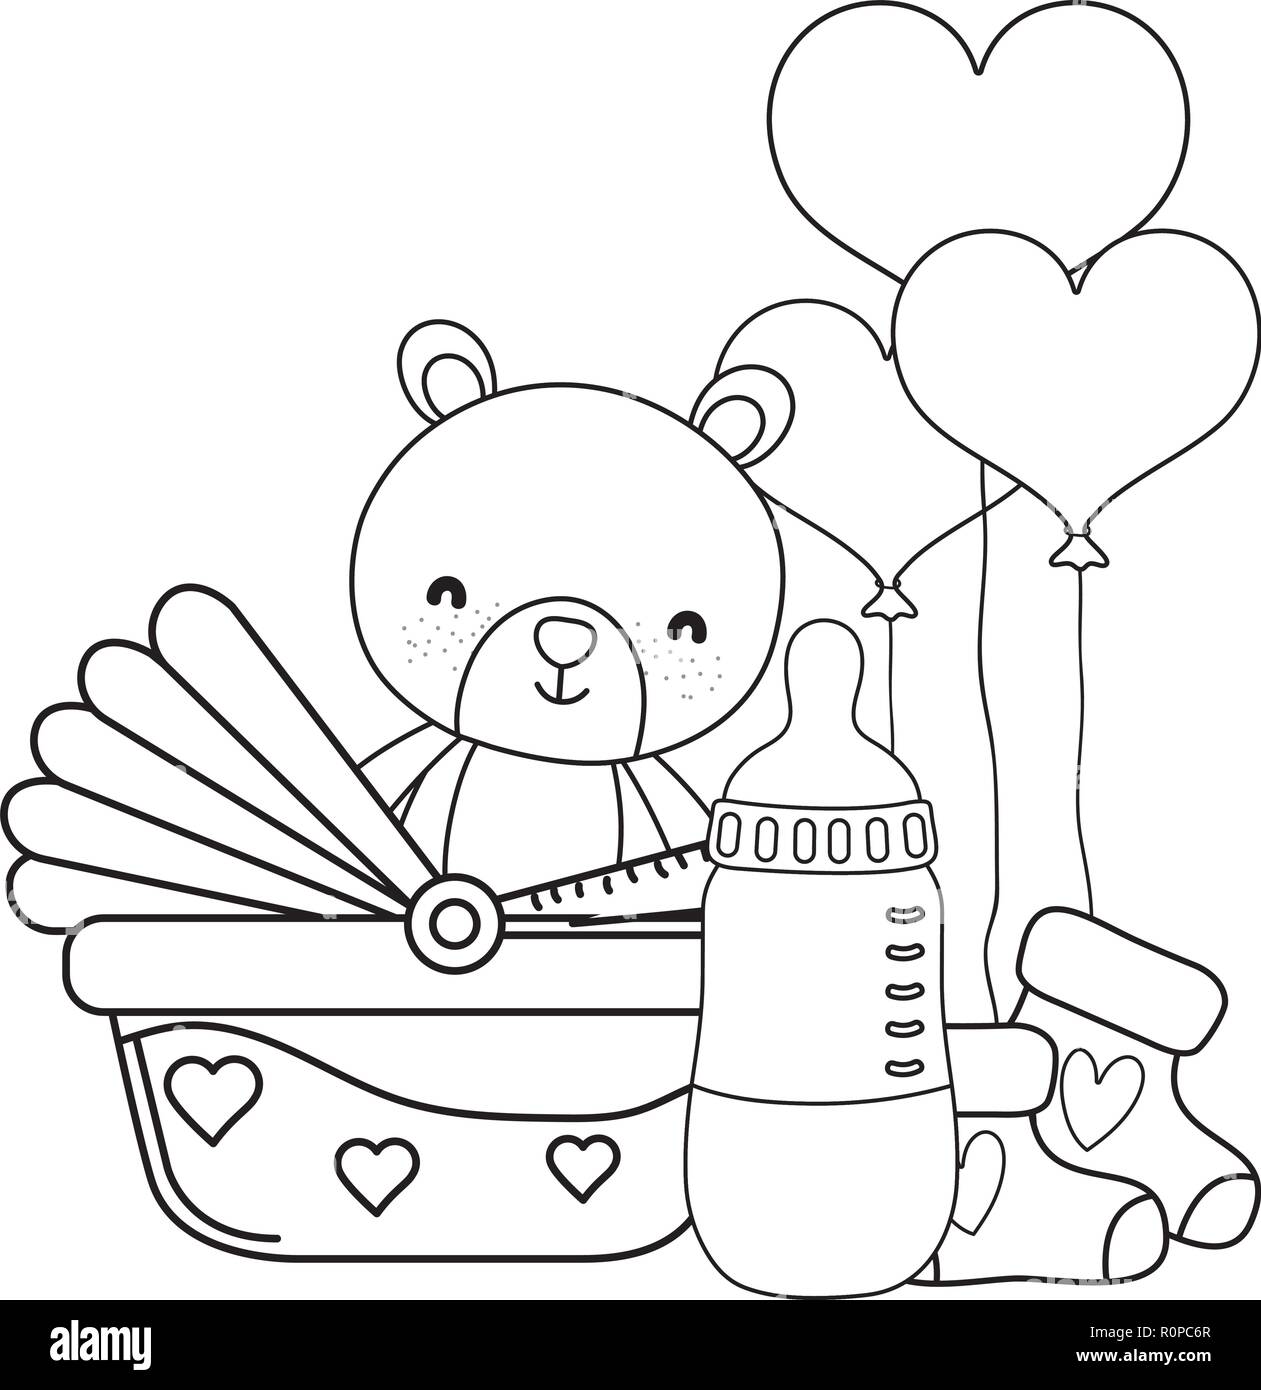 carriage cute teddy bear in black and white Stock Vector